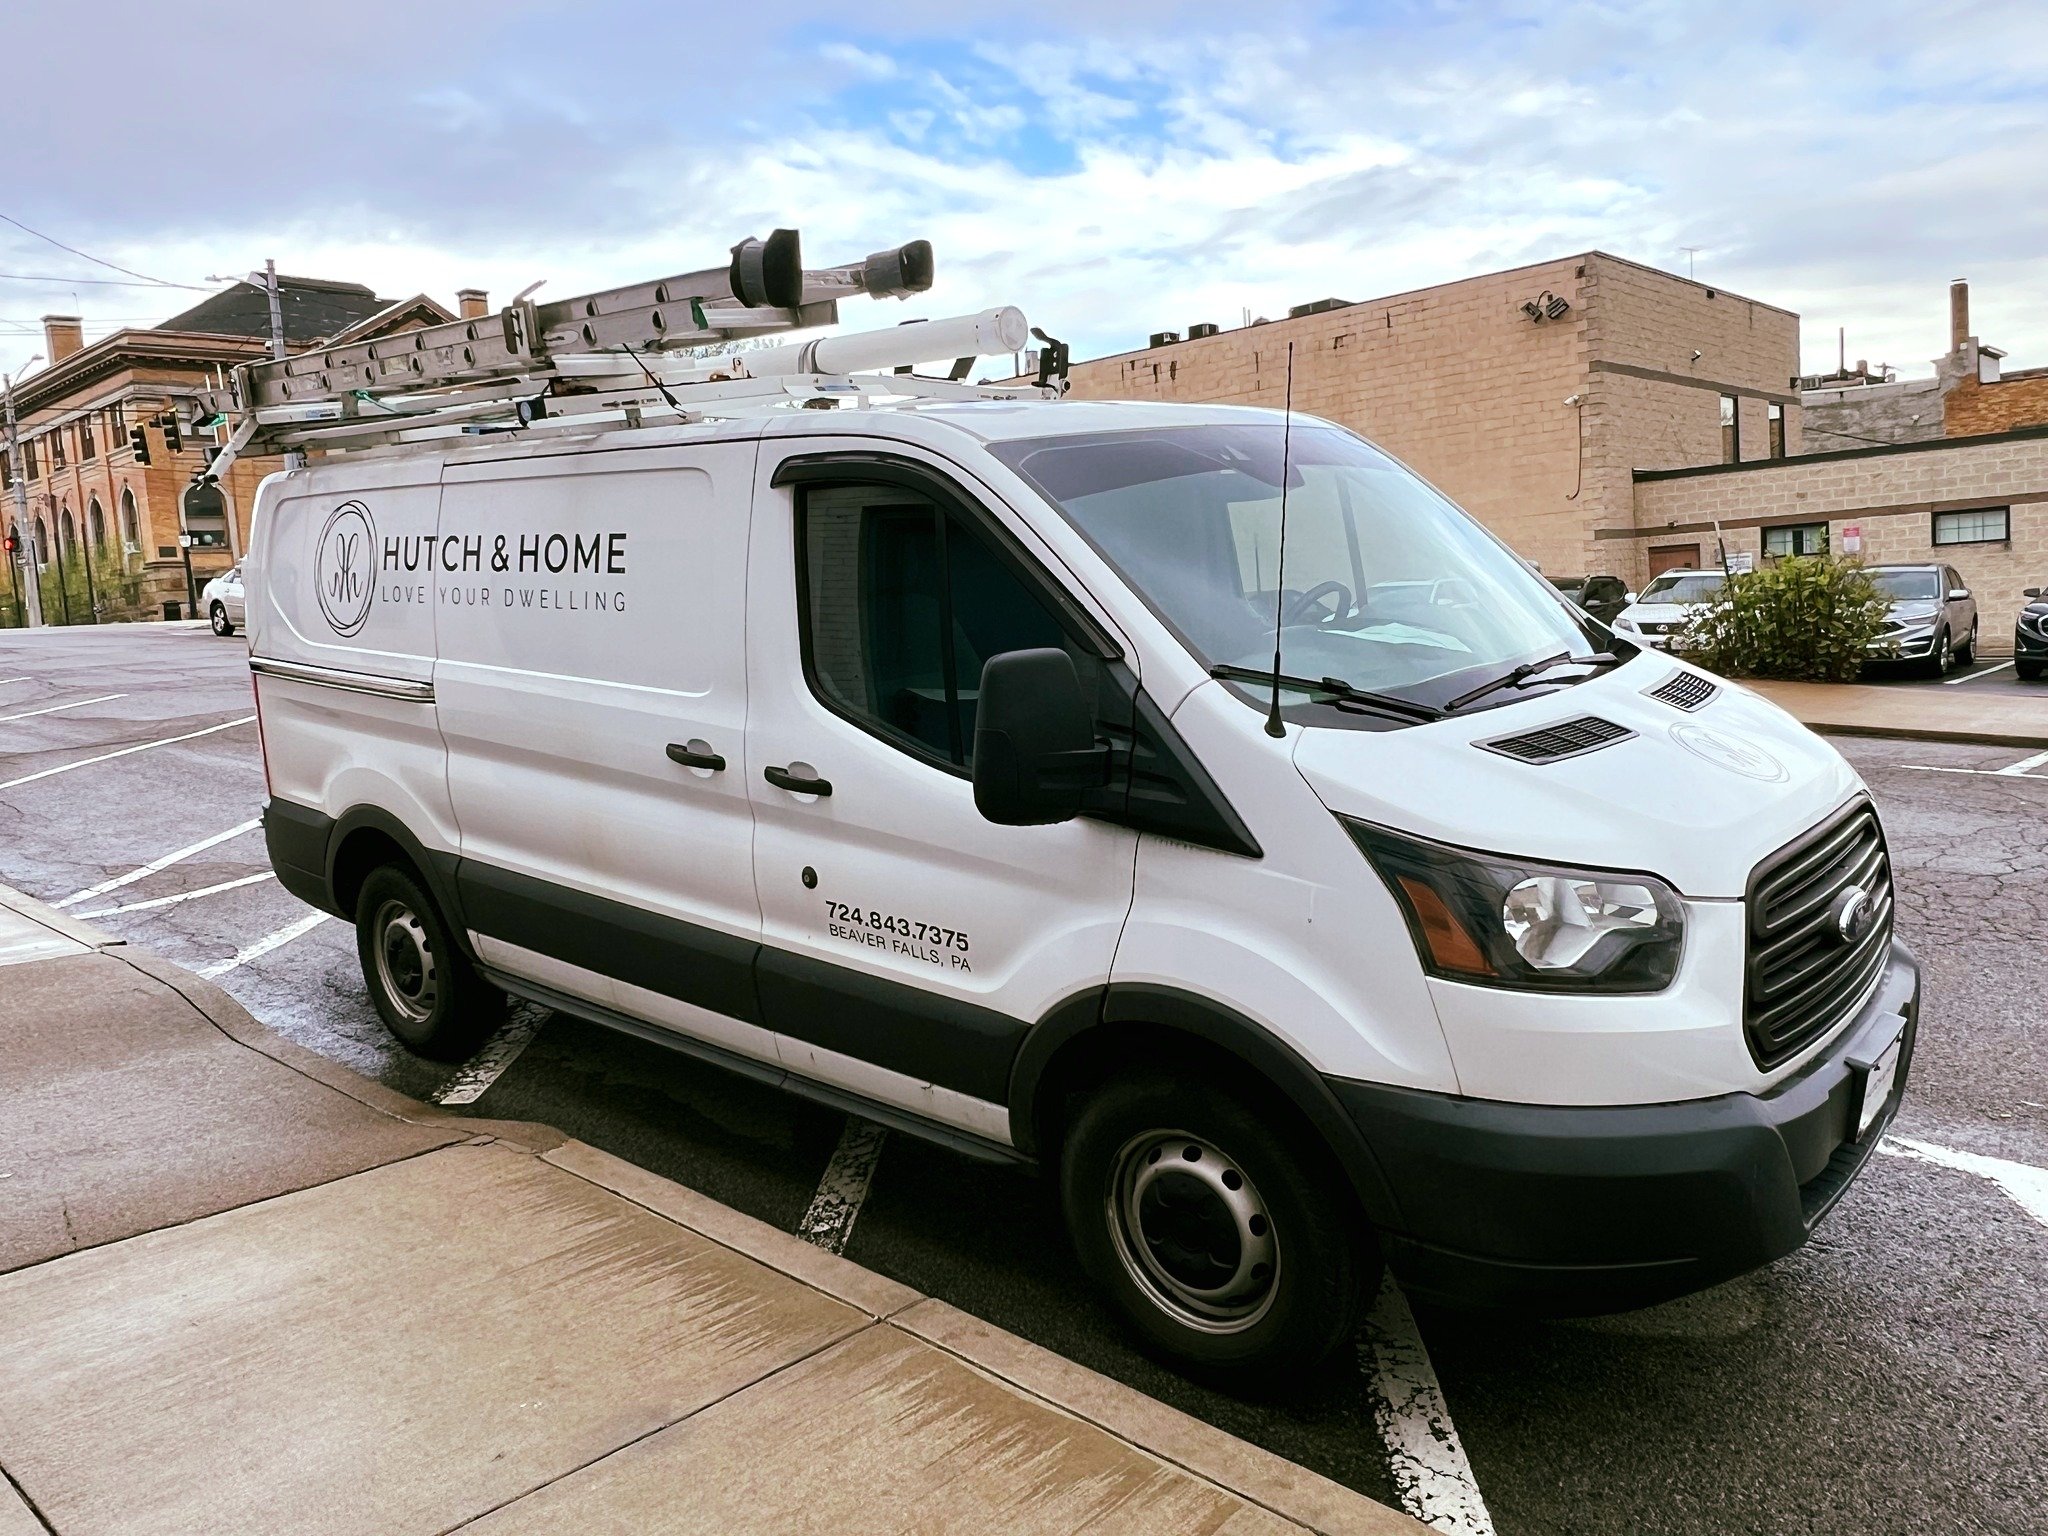 When you see our H&amp;H van pull up, you can expect good things!... From Hutch &amp; Home lifestyle furnishings to our H&amp;H project team, we're ready to work with you.
.
Hutch &amp; Home - Love Your Dwelling 🇺🇸
1224 7th Ave. - Beaver Falls, PA 